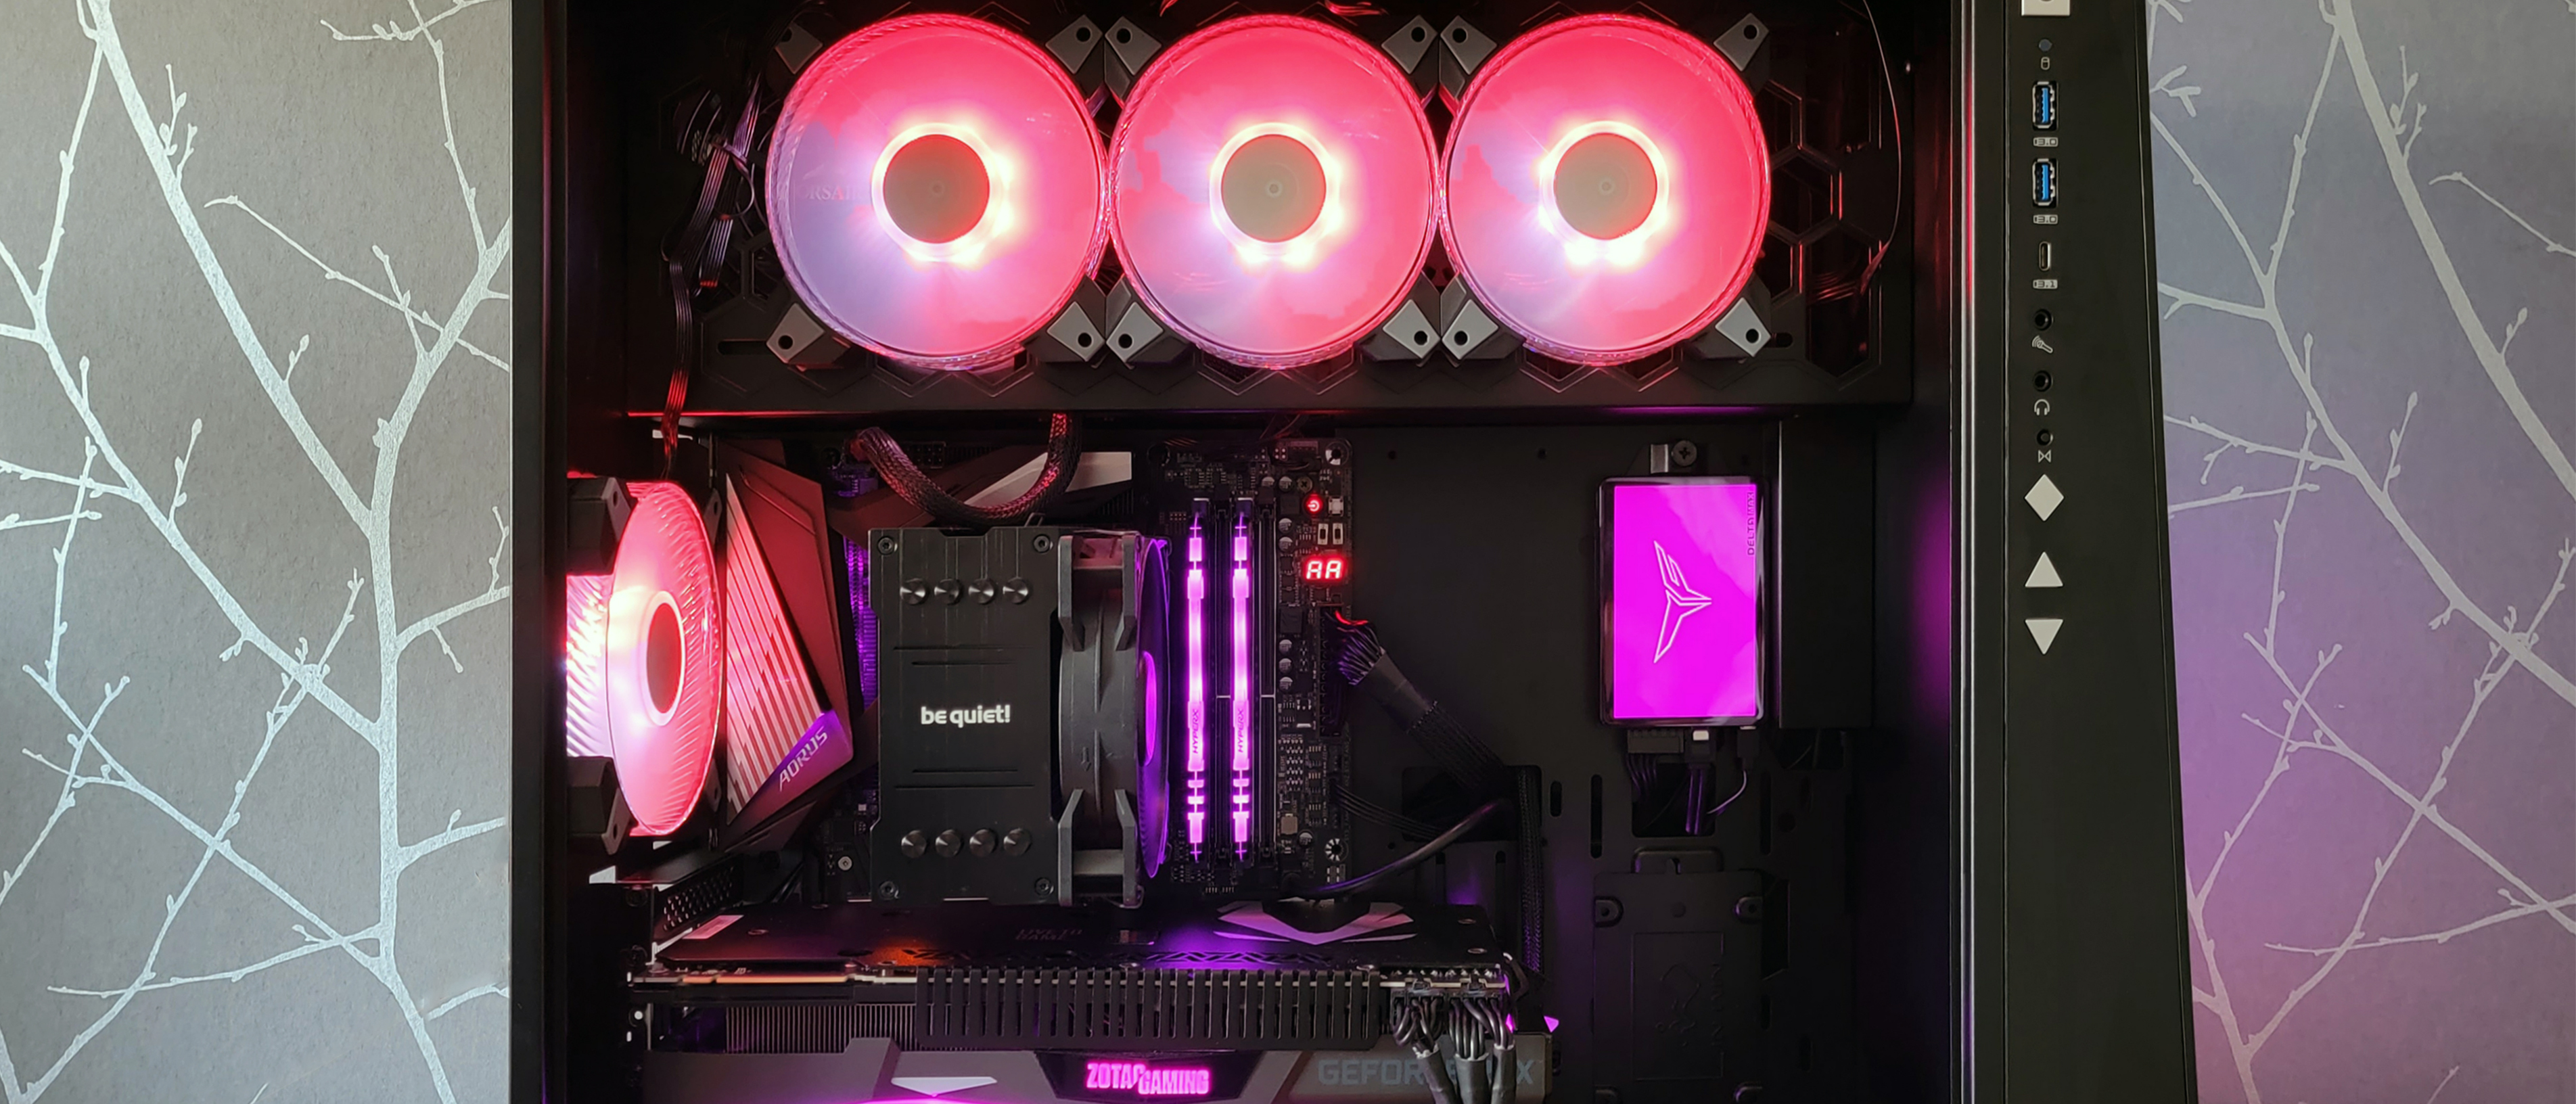 Put the Heat in Your Gaming with These Top 10 PC Parts